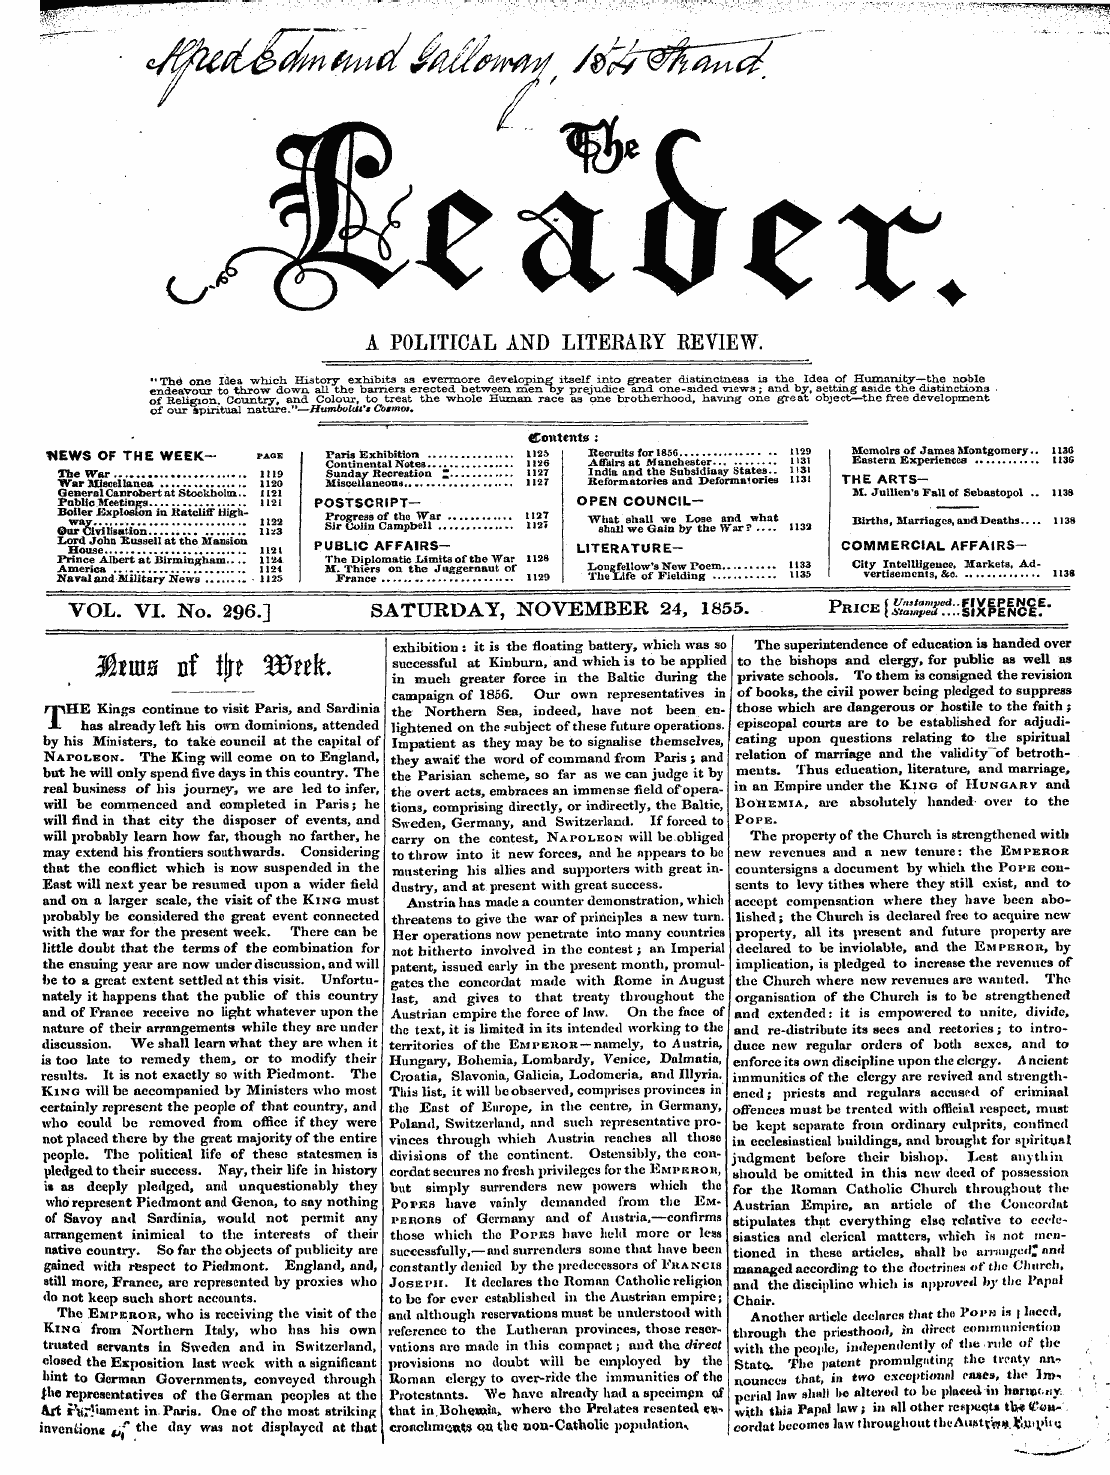 Leader (1850-1860): jS F Y, 2nd edition - Contents: